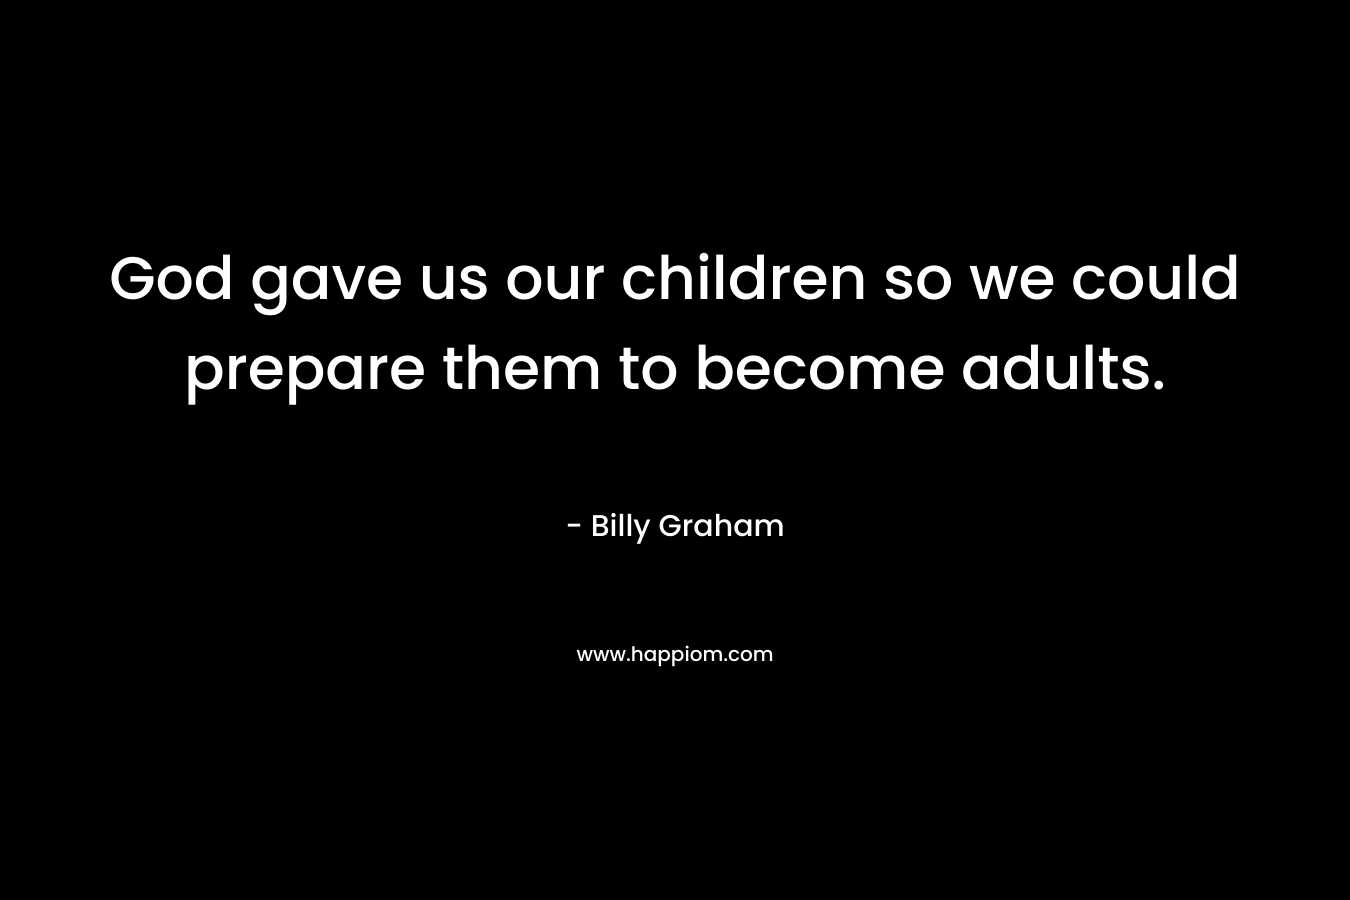 God gave us our children so we could prepare them to become adults.